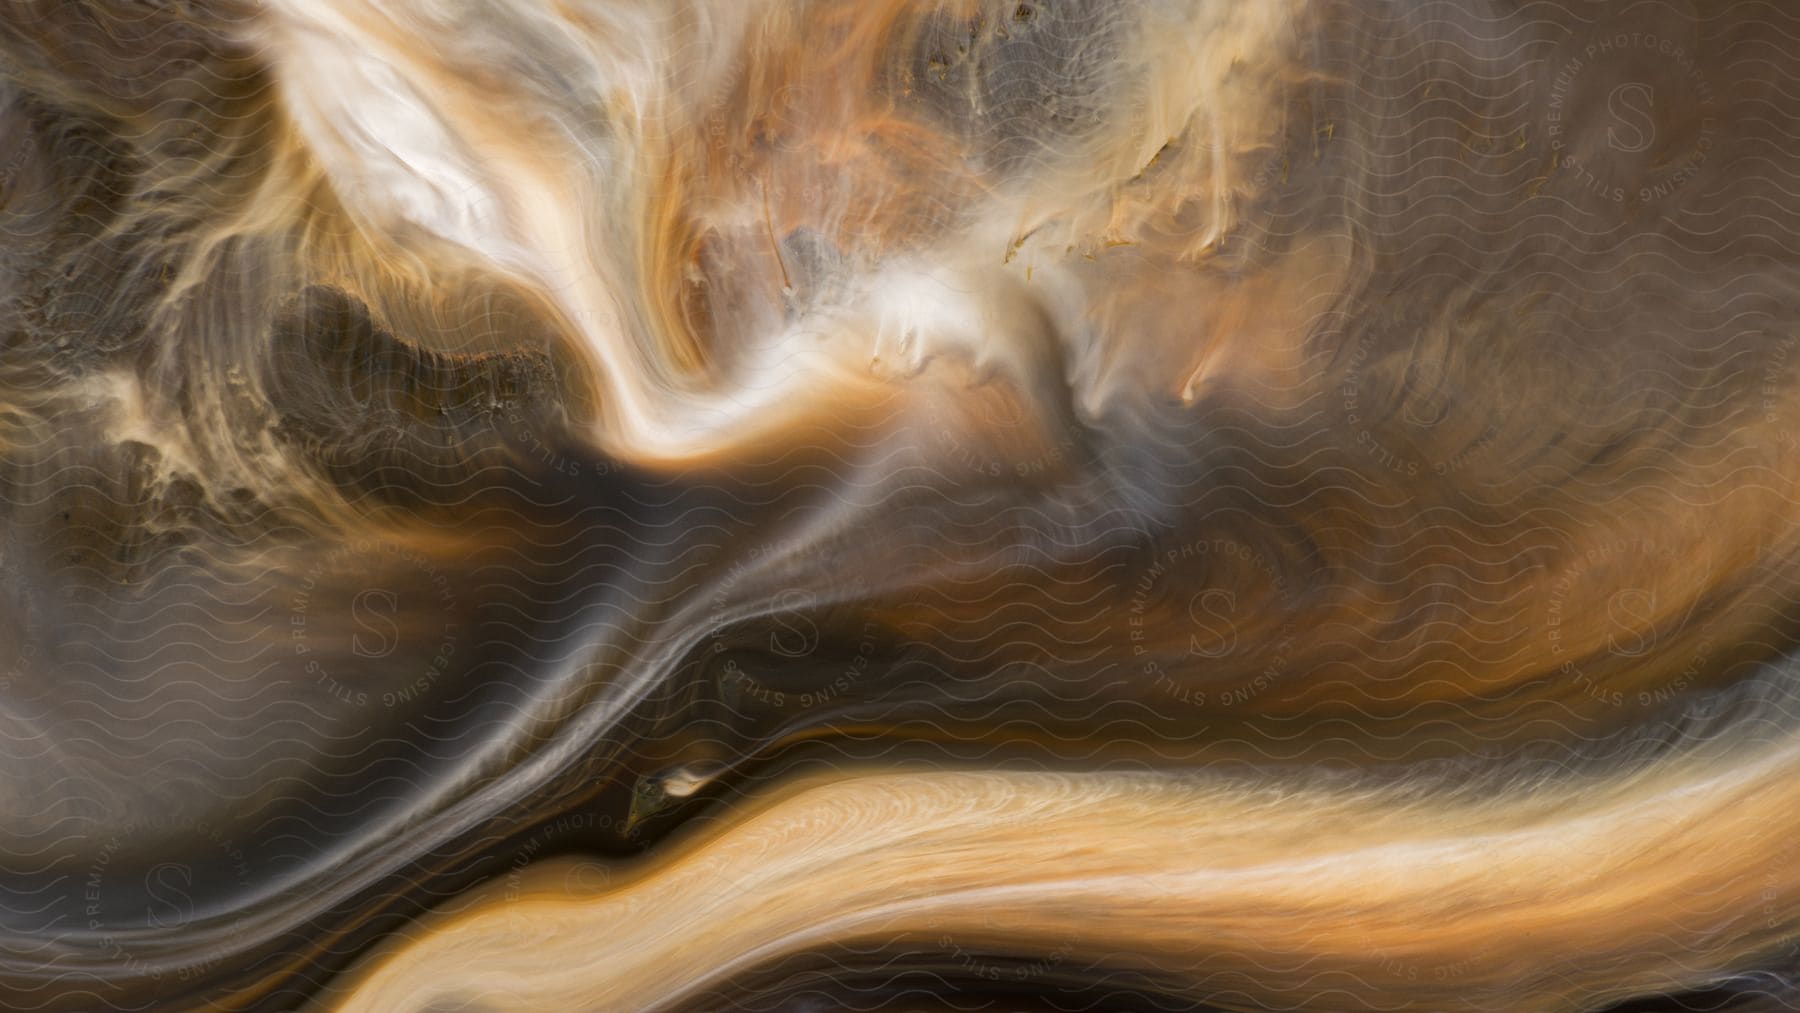 Dark brown and white liquids swirling together